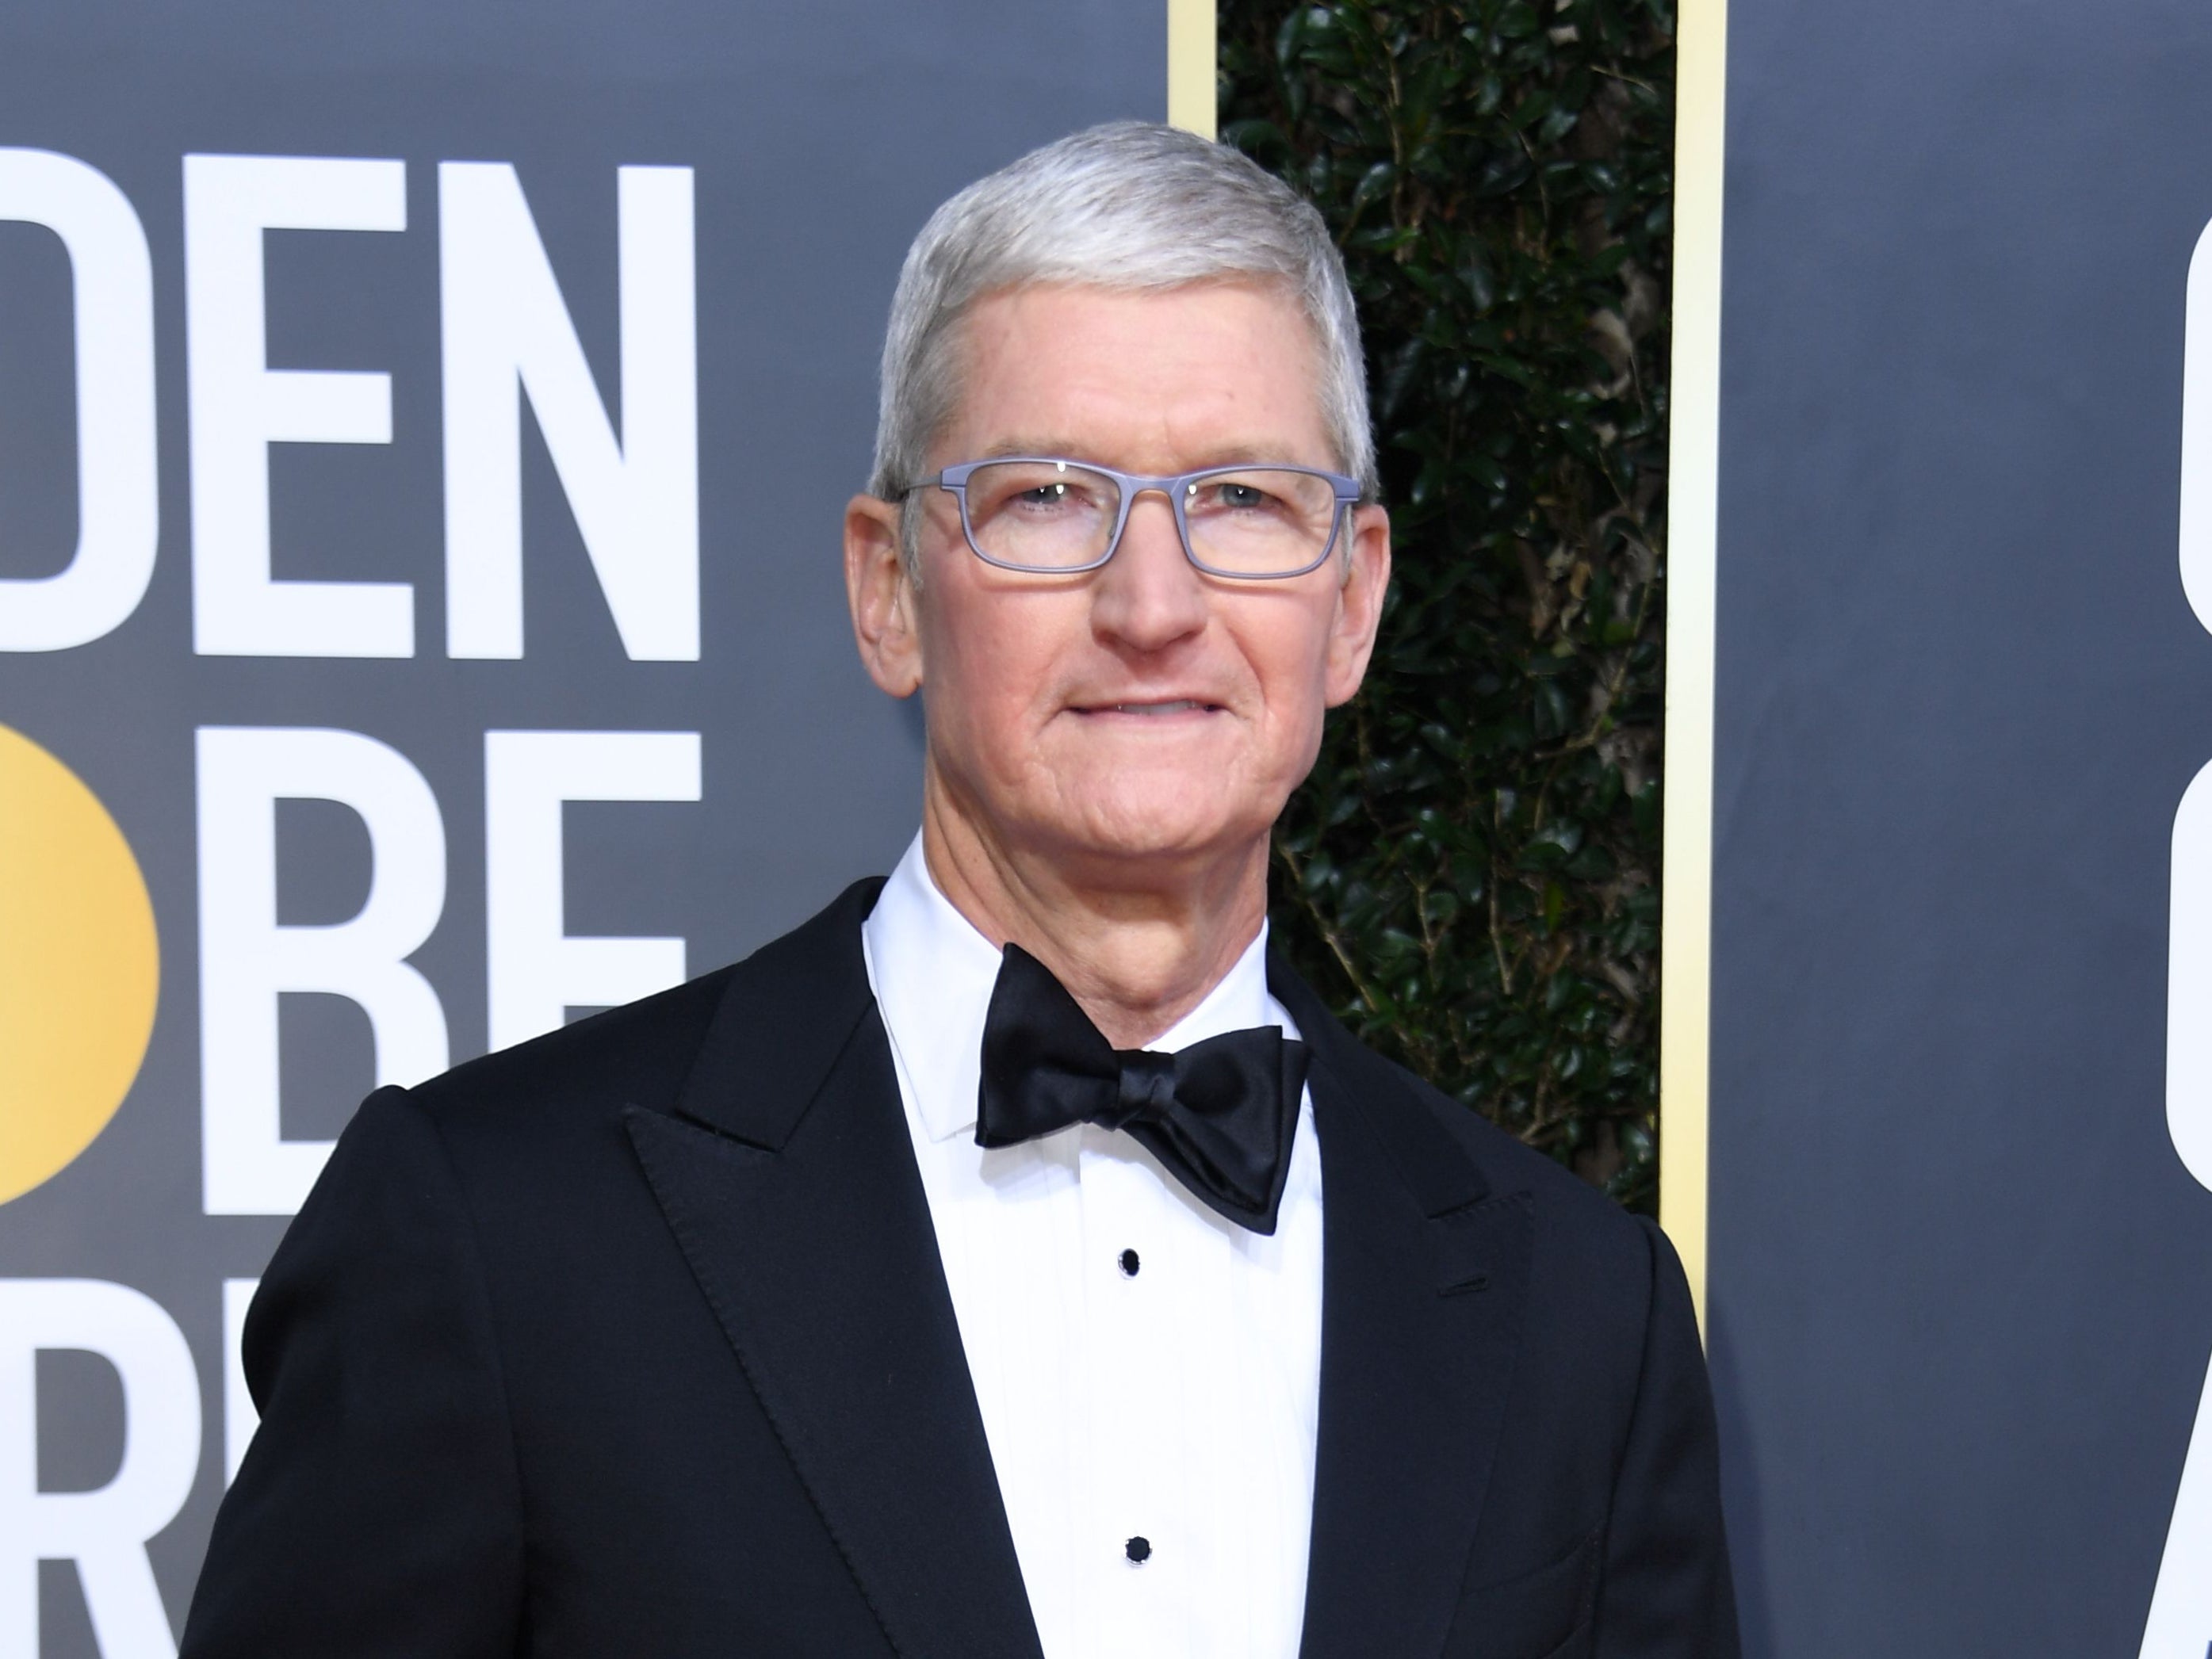 Tim Cook arrives for the 77th annual Golden Globe Awards on 5 January 2020 in Beverly Hills, California